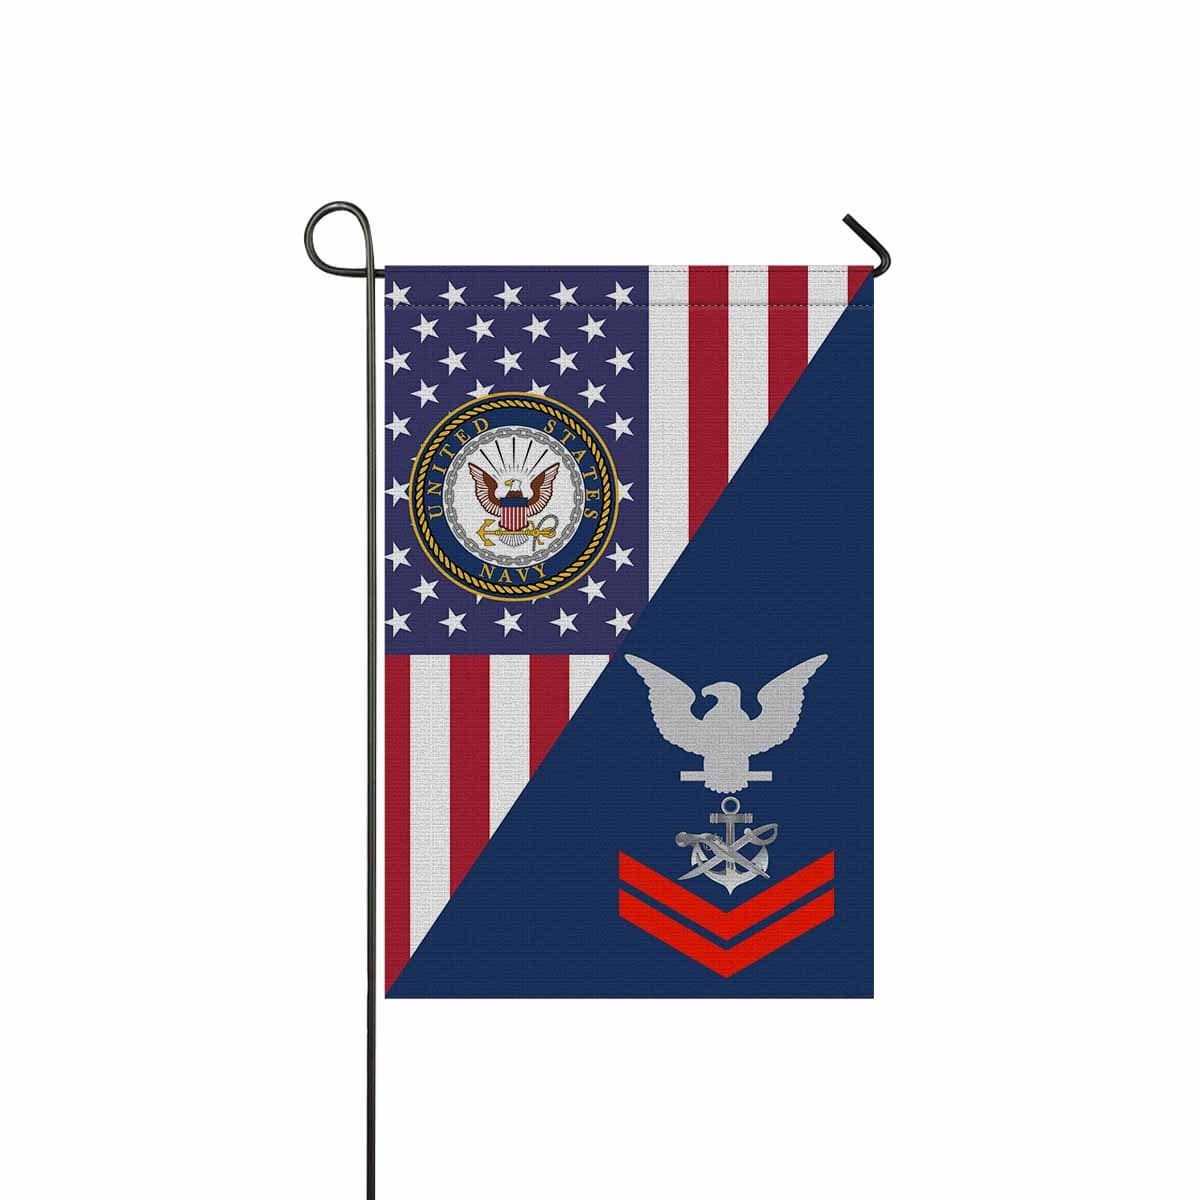 Navy Special Warfare Boat Operator Navy SB E-5 Red Stripe Garden Flag/Yard Flag 12 inches x 18 inches Twin-Side Printing-GDFlag-Navy-Rating-Veterans Nation